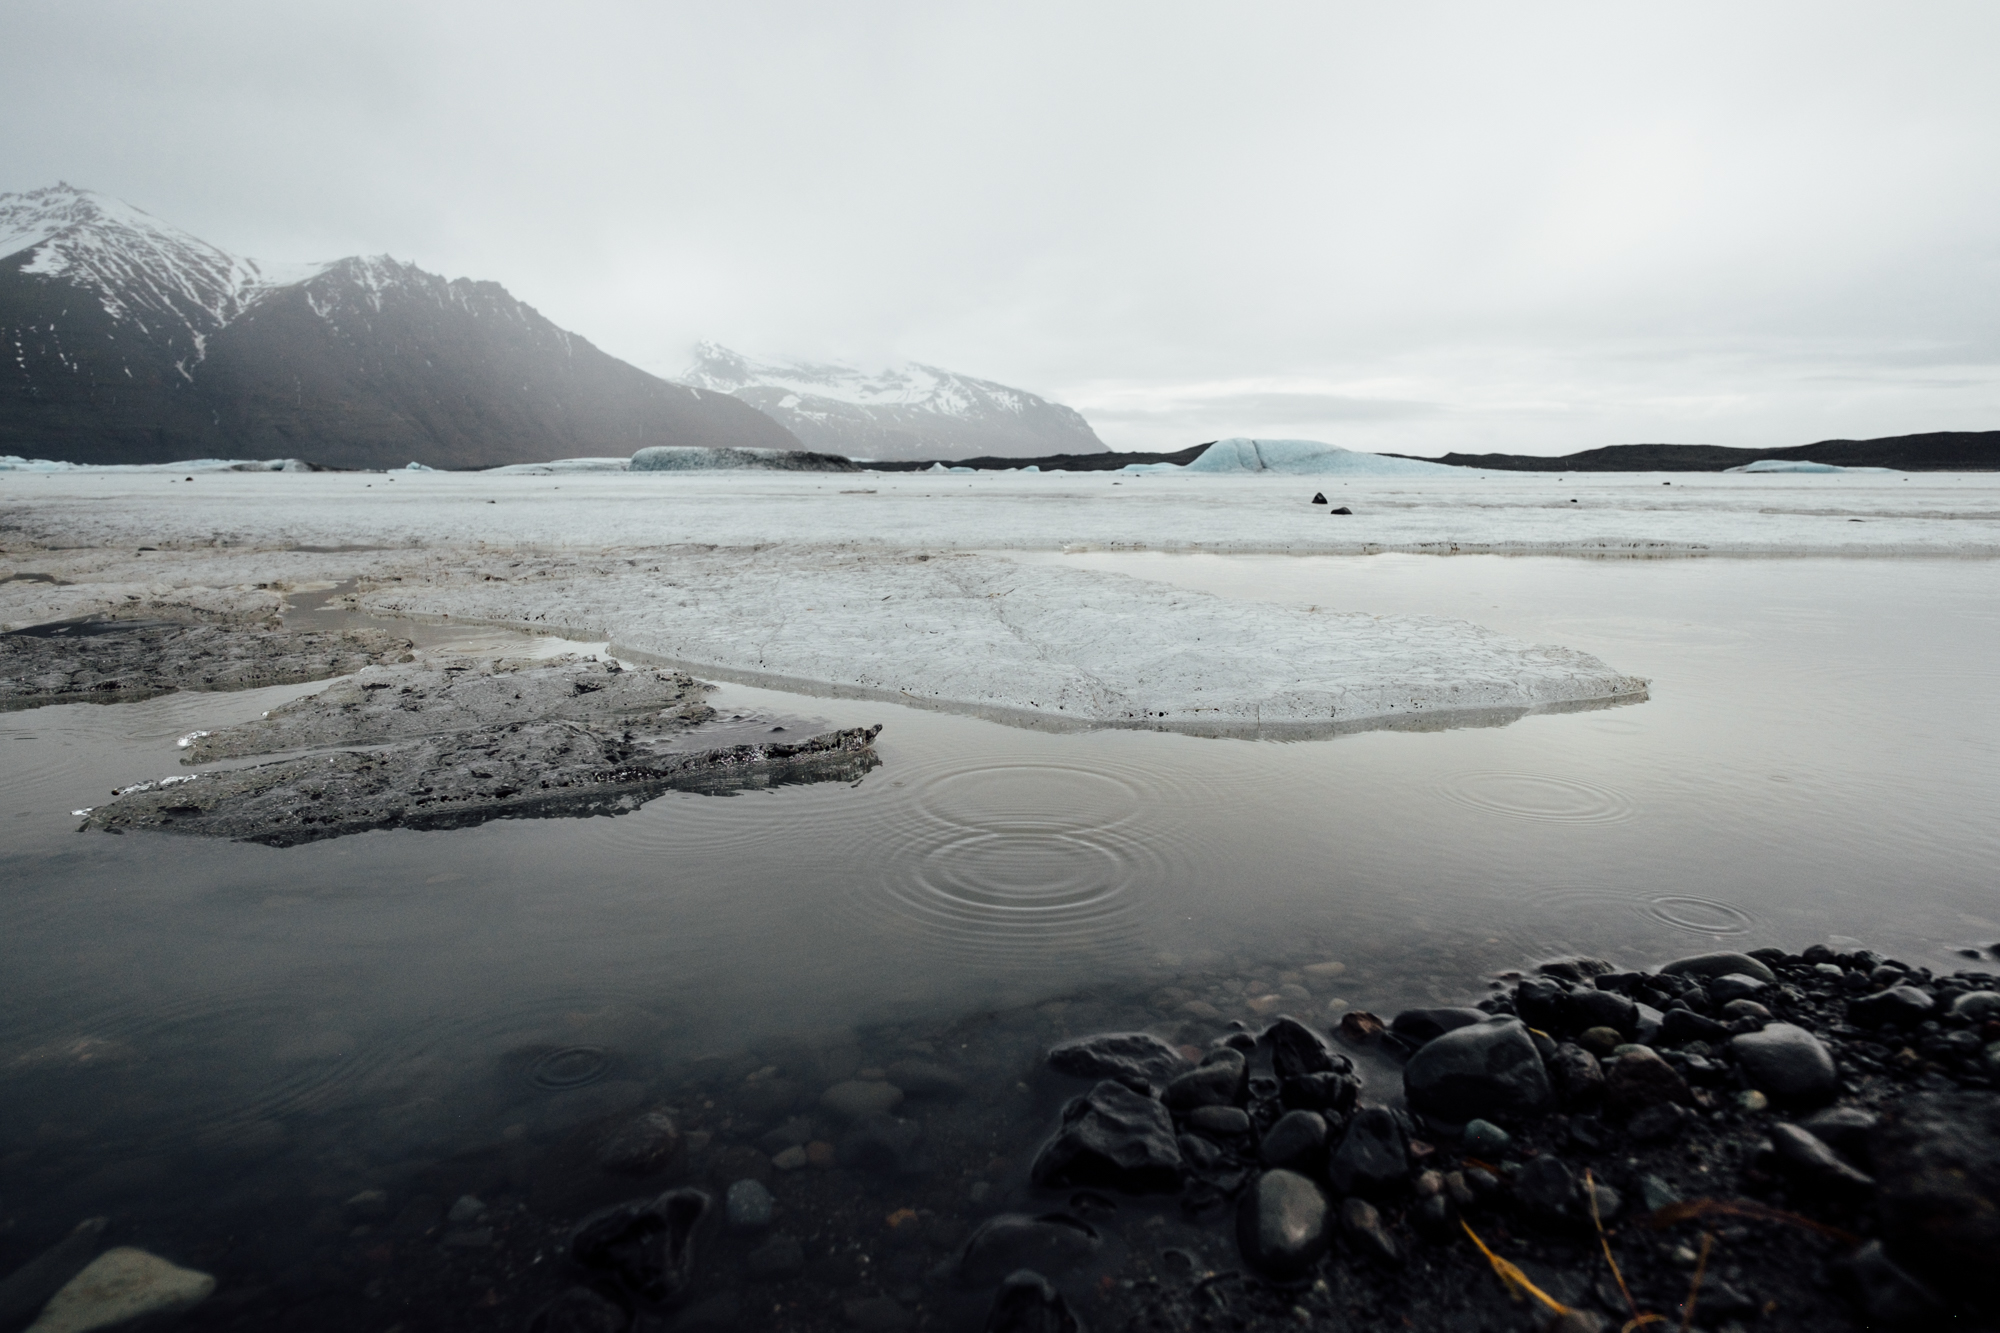  I could write a novel about it, but the glaciers in Iceland are melting at an alarming rate. This is looking out at the lagoon of melting glacial material at Skaftafellsjökull. This website has a photo series that shows how dramatically the glacier 